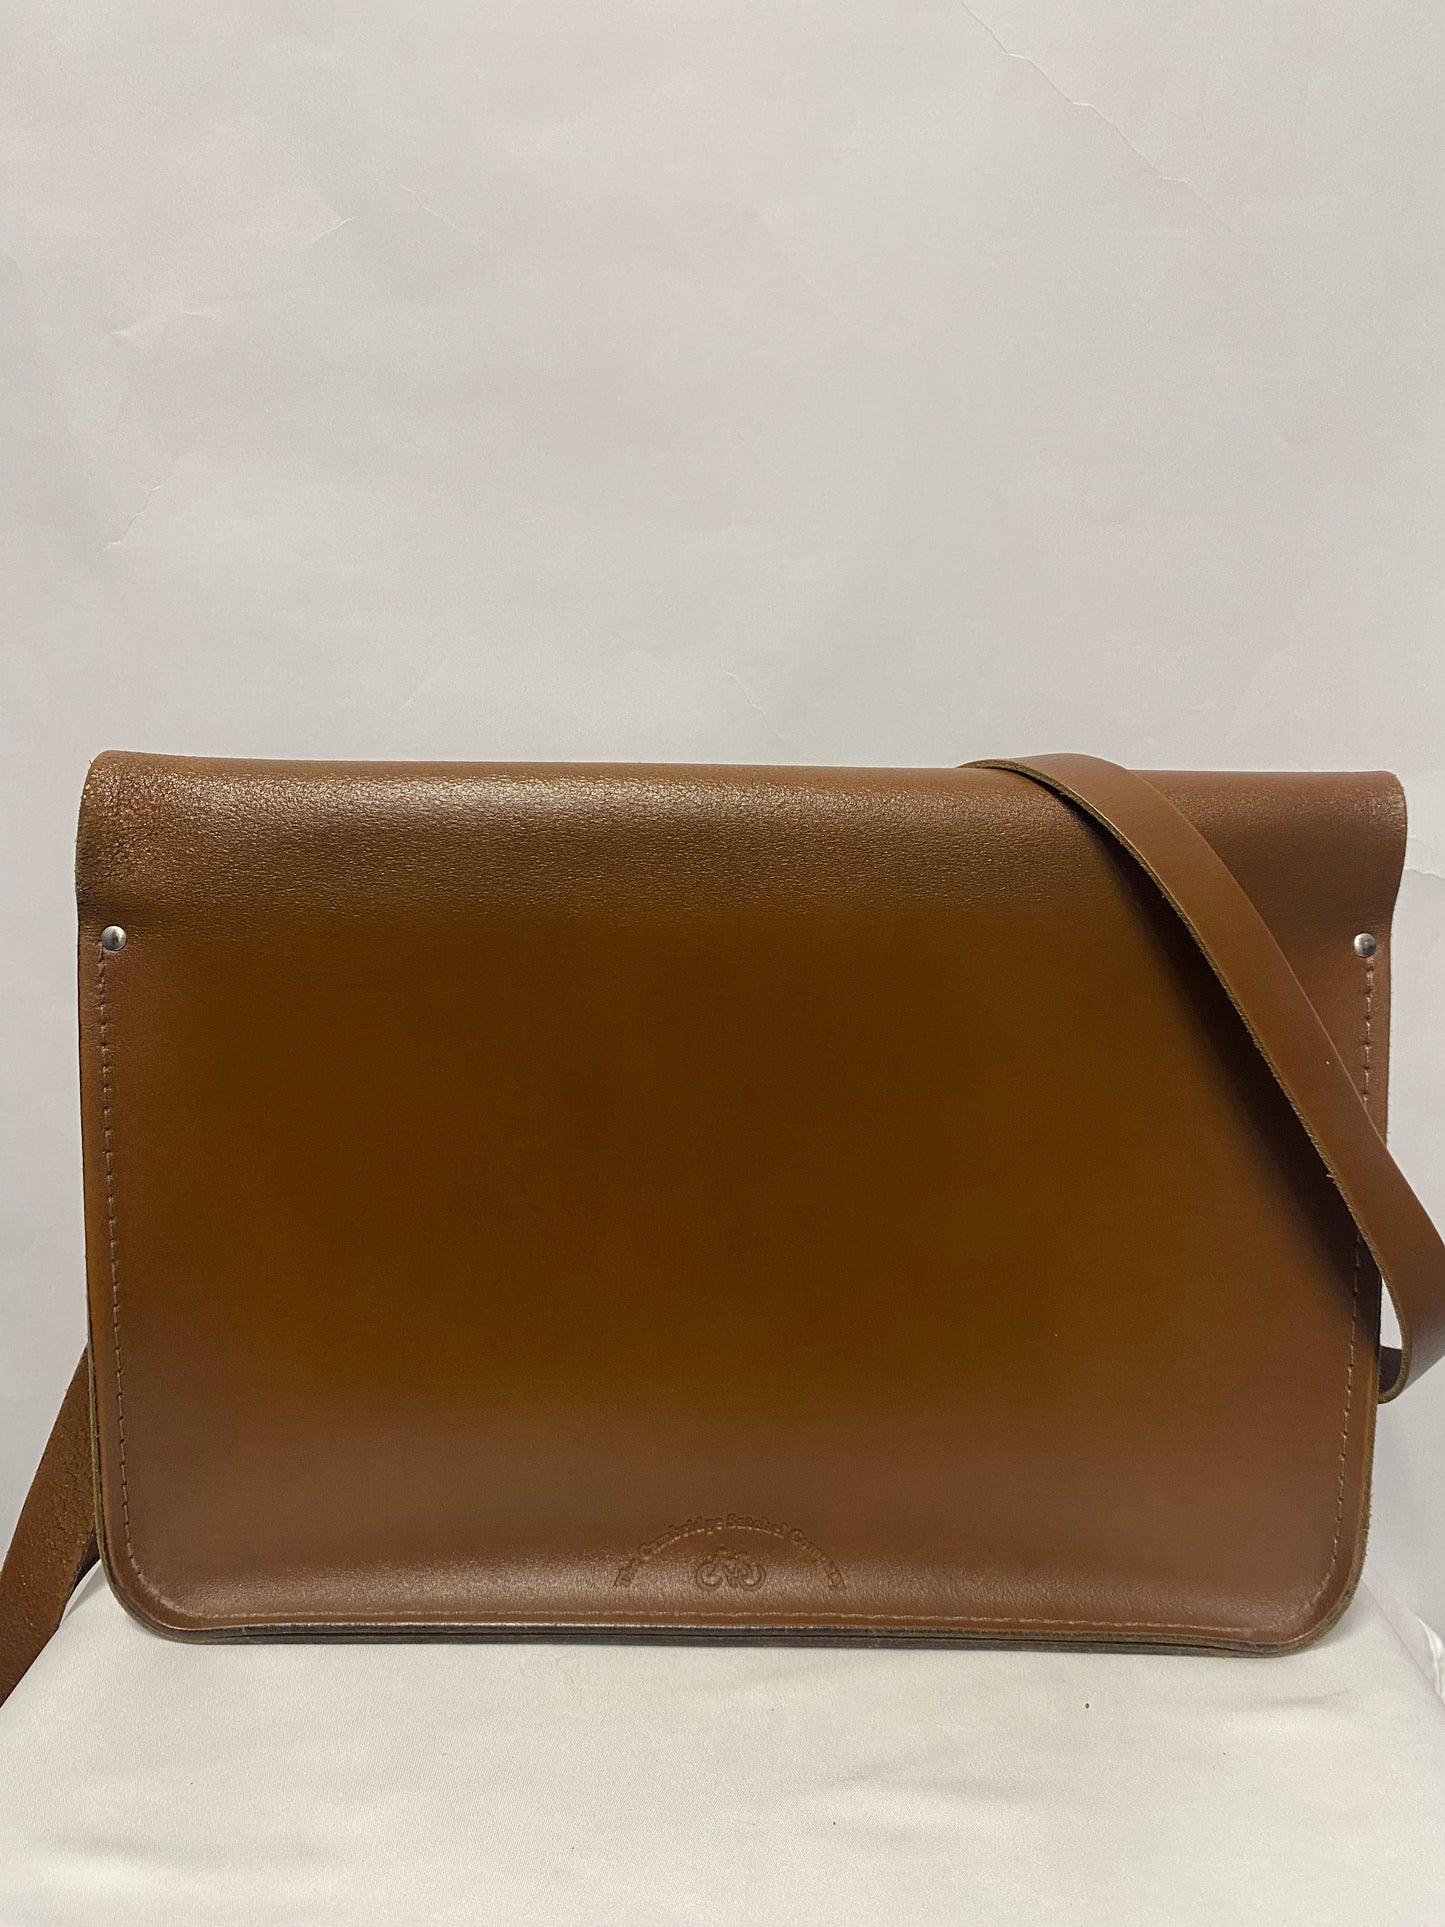 The Cambridge Satchel Company 15 Inch Brown Leather Satchel with Cross Body Strap